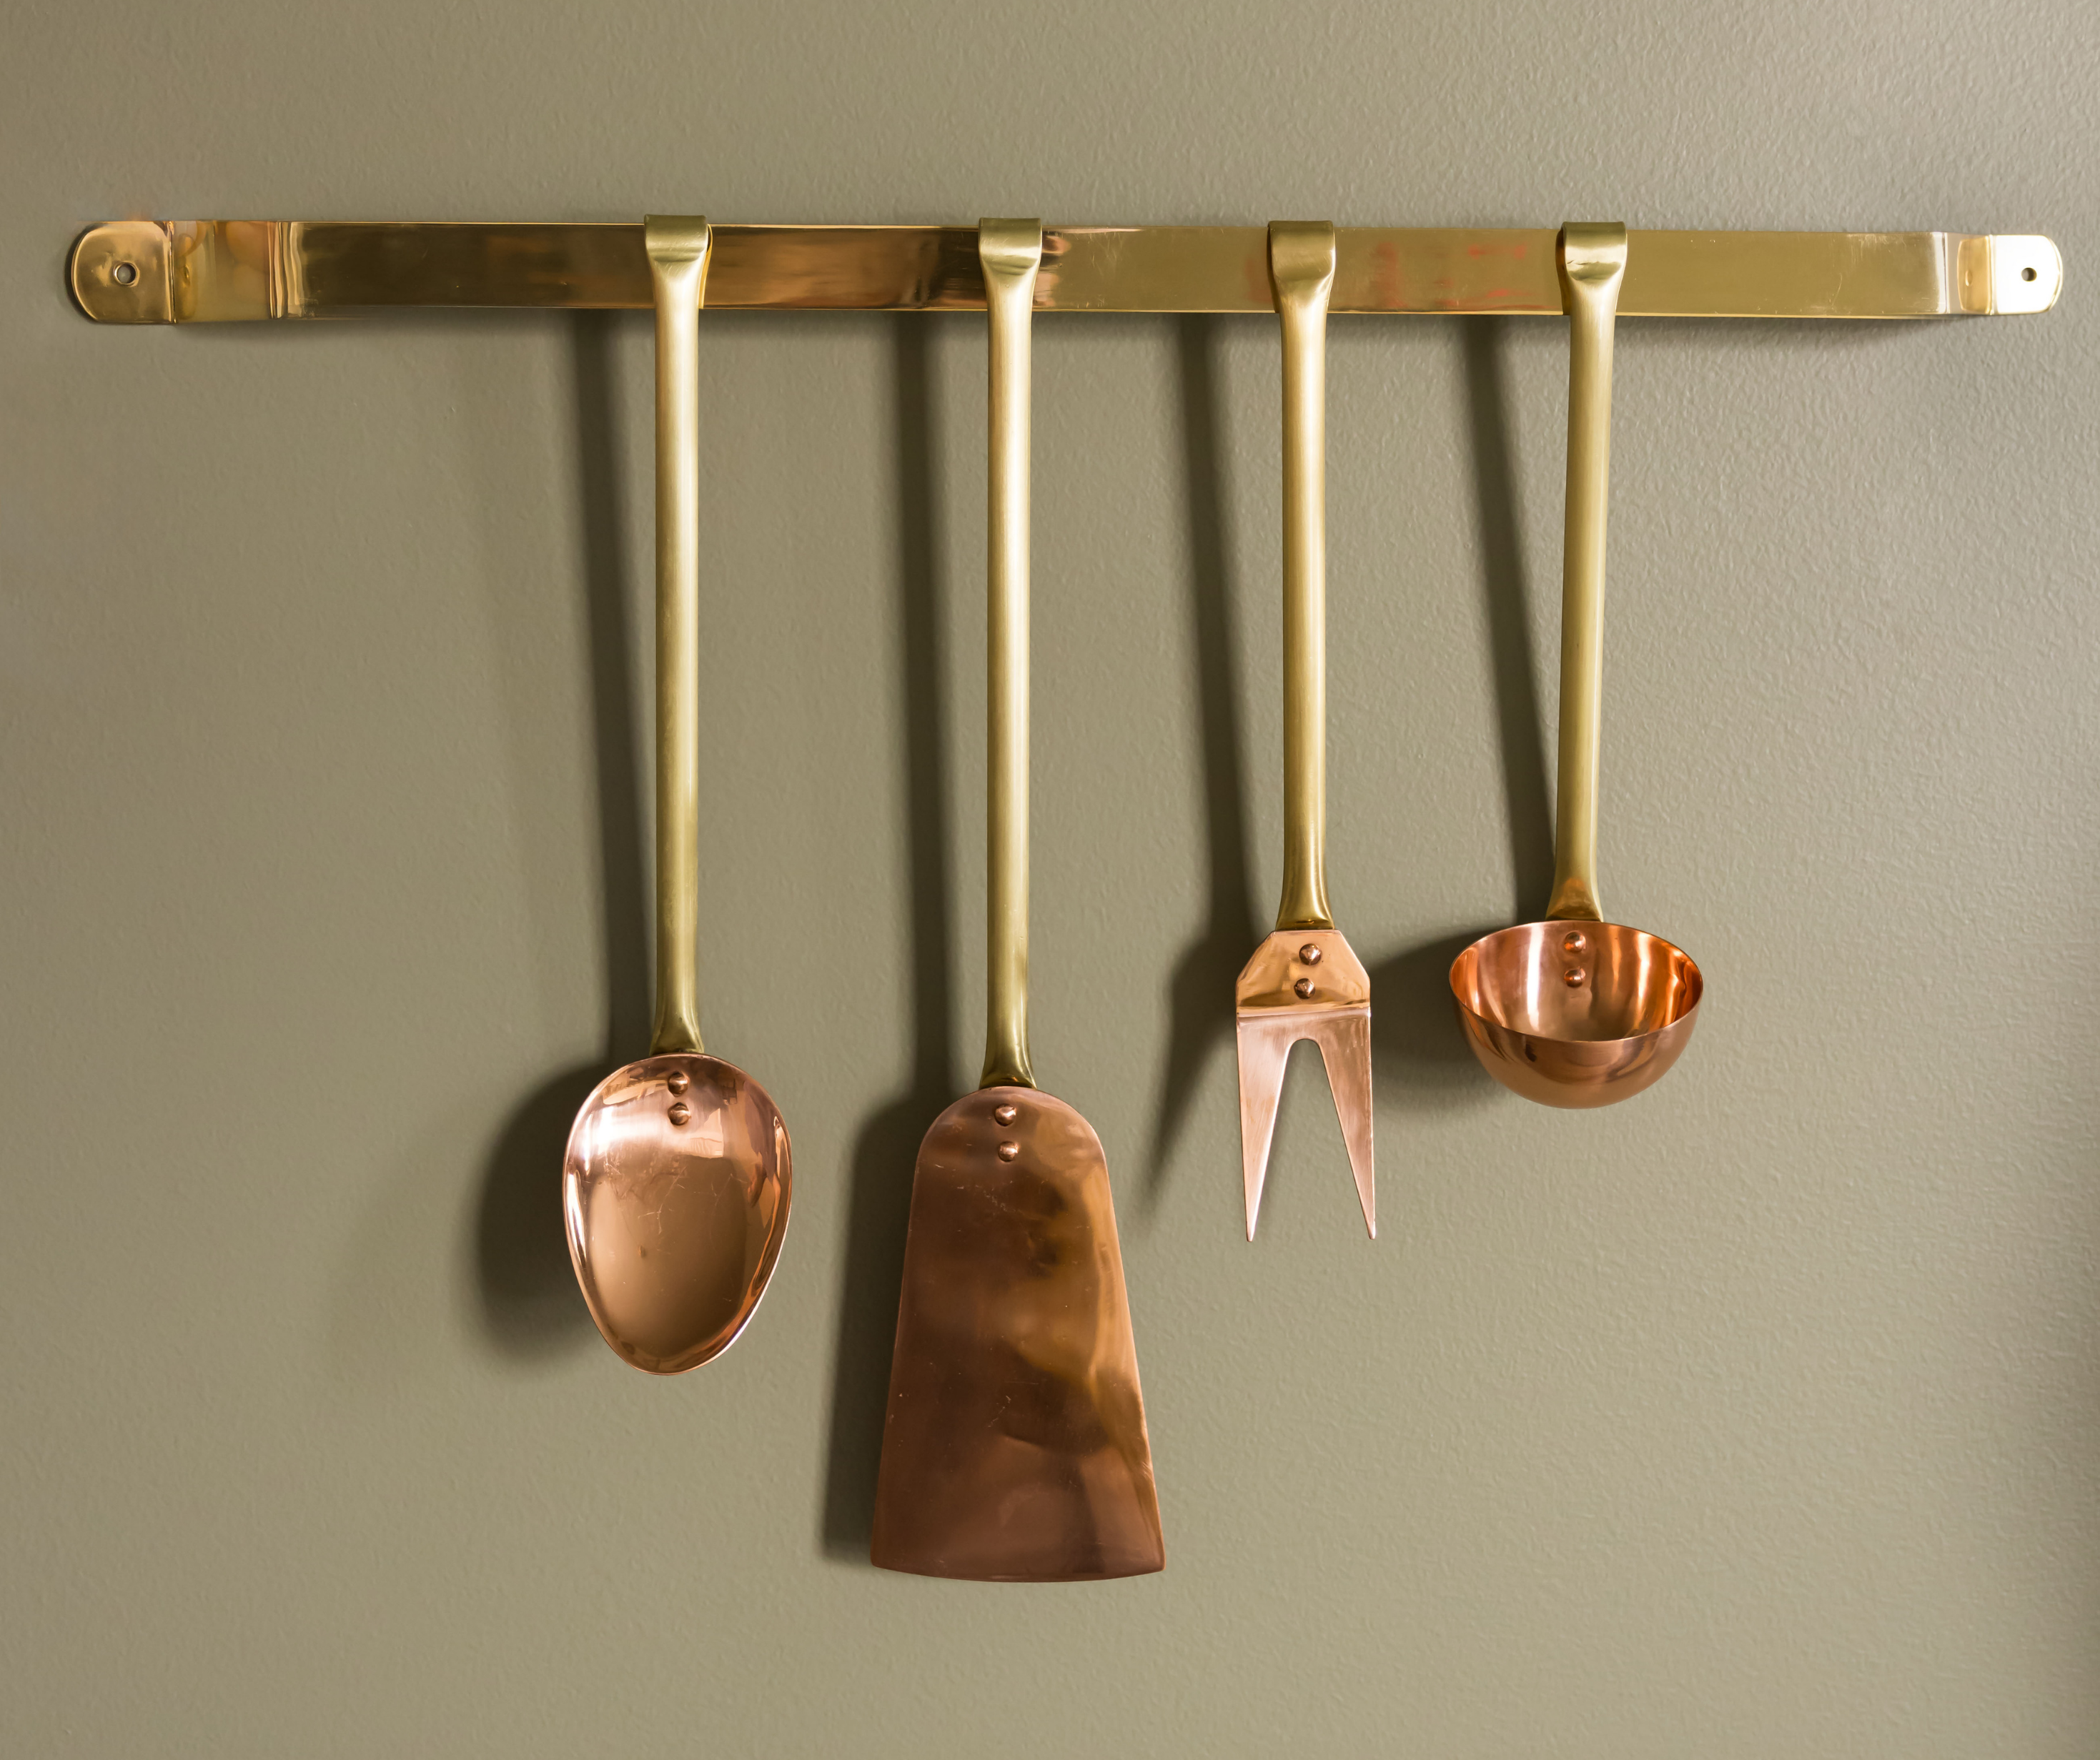 Utensil Hanging Rod with Tools